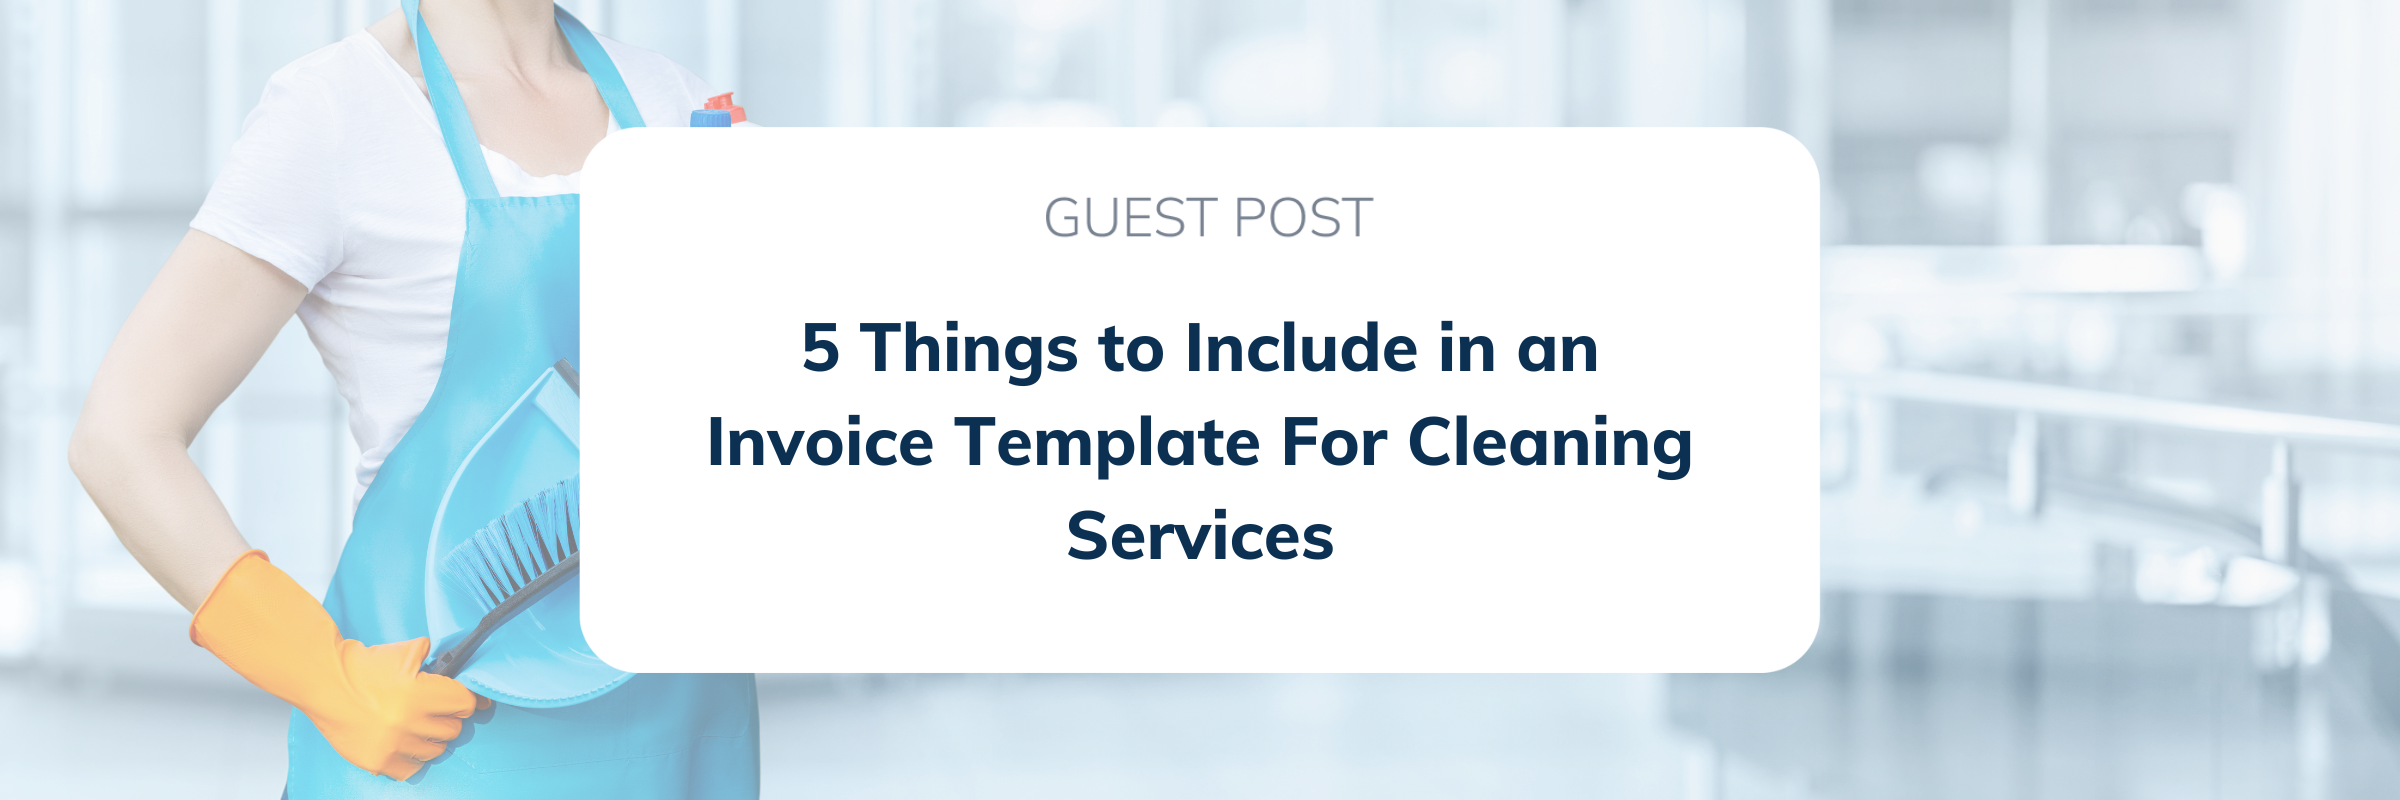 5 Things to Include in an Invoice Template For Cleaning Services